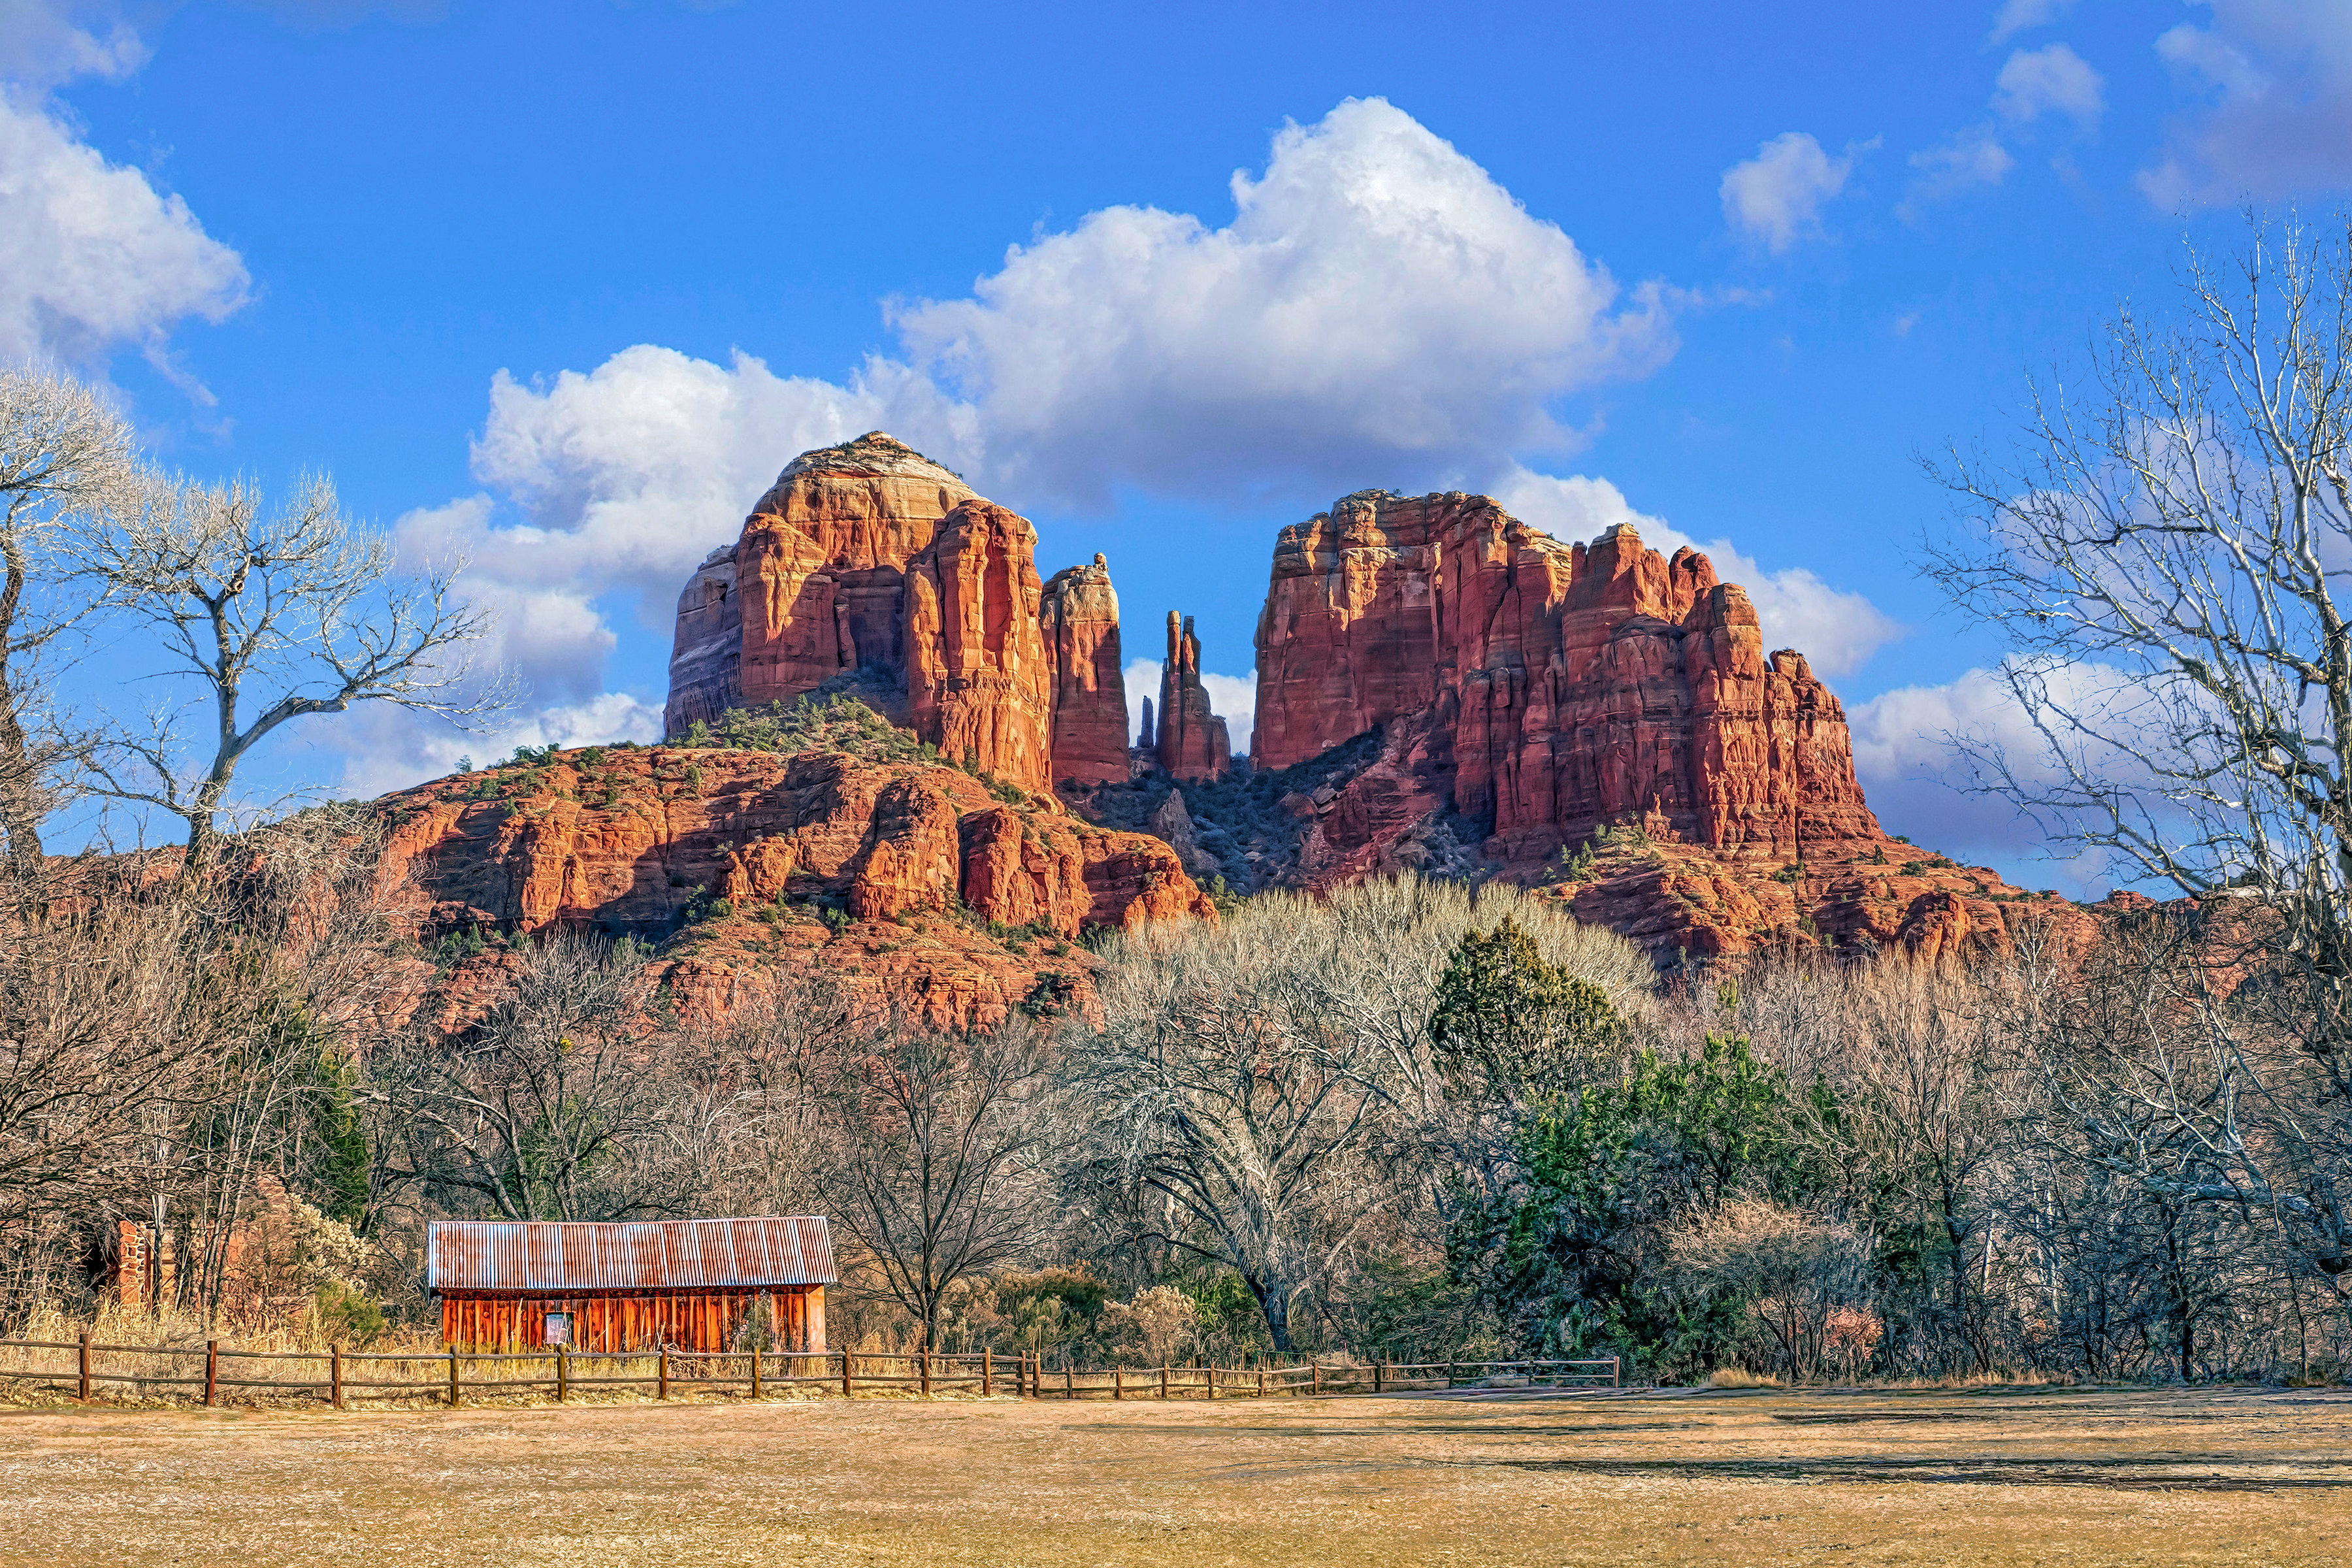 CATHEDRAL ROCK - Probably THE iconic rock formation in Sedona, Arizona. I have photographed it often from various location. You will run across it a few more times in my gallery.